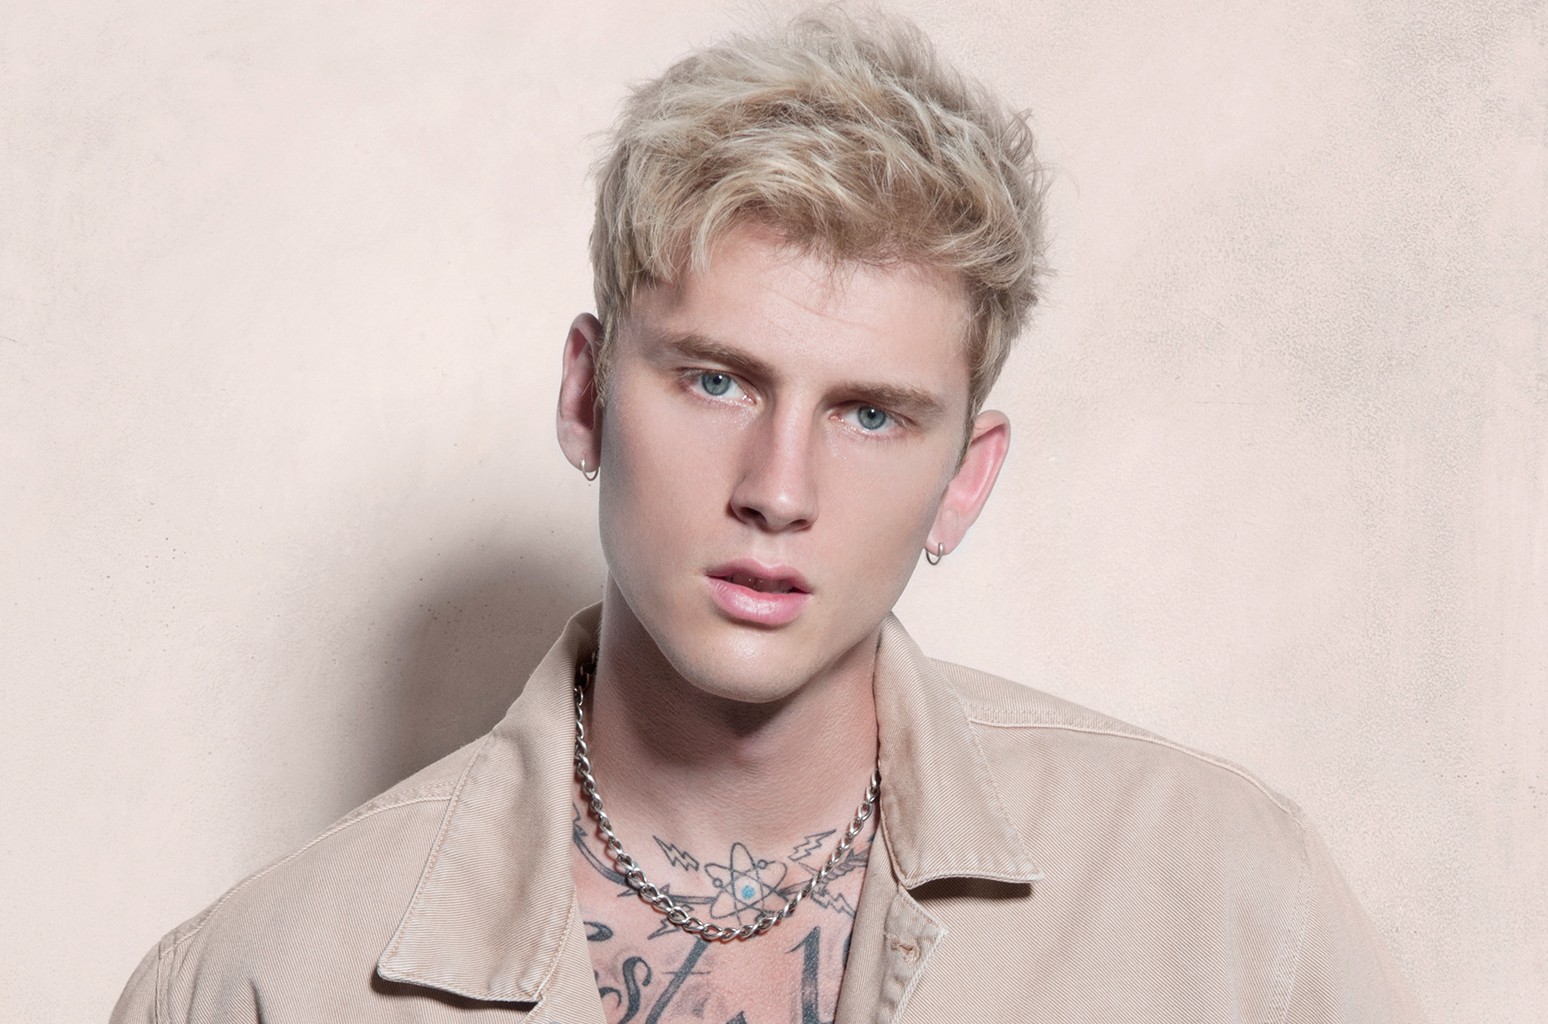 MACHINE GUN KELLY REVEALS OFFICIAL ARTWORK FOR ‘TICKETS TO MY DOWNFALL’